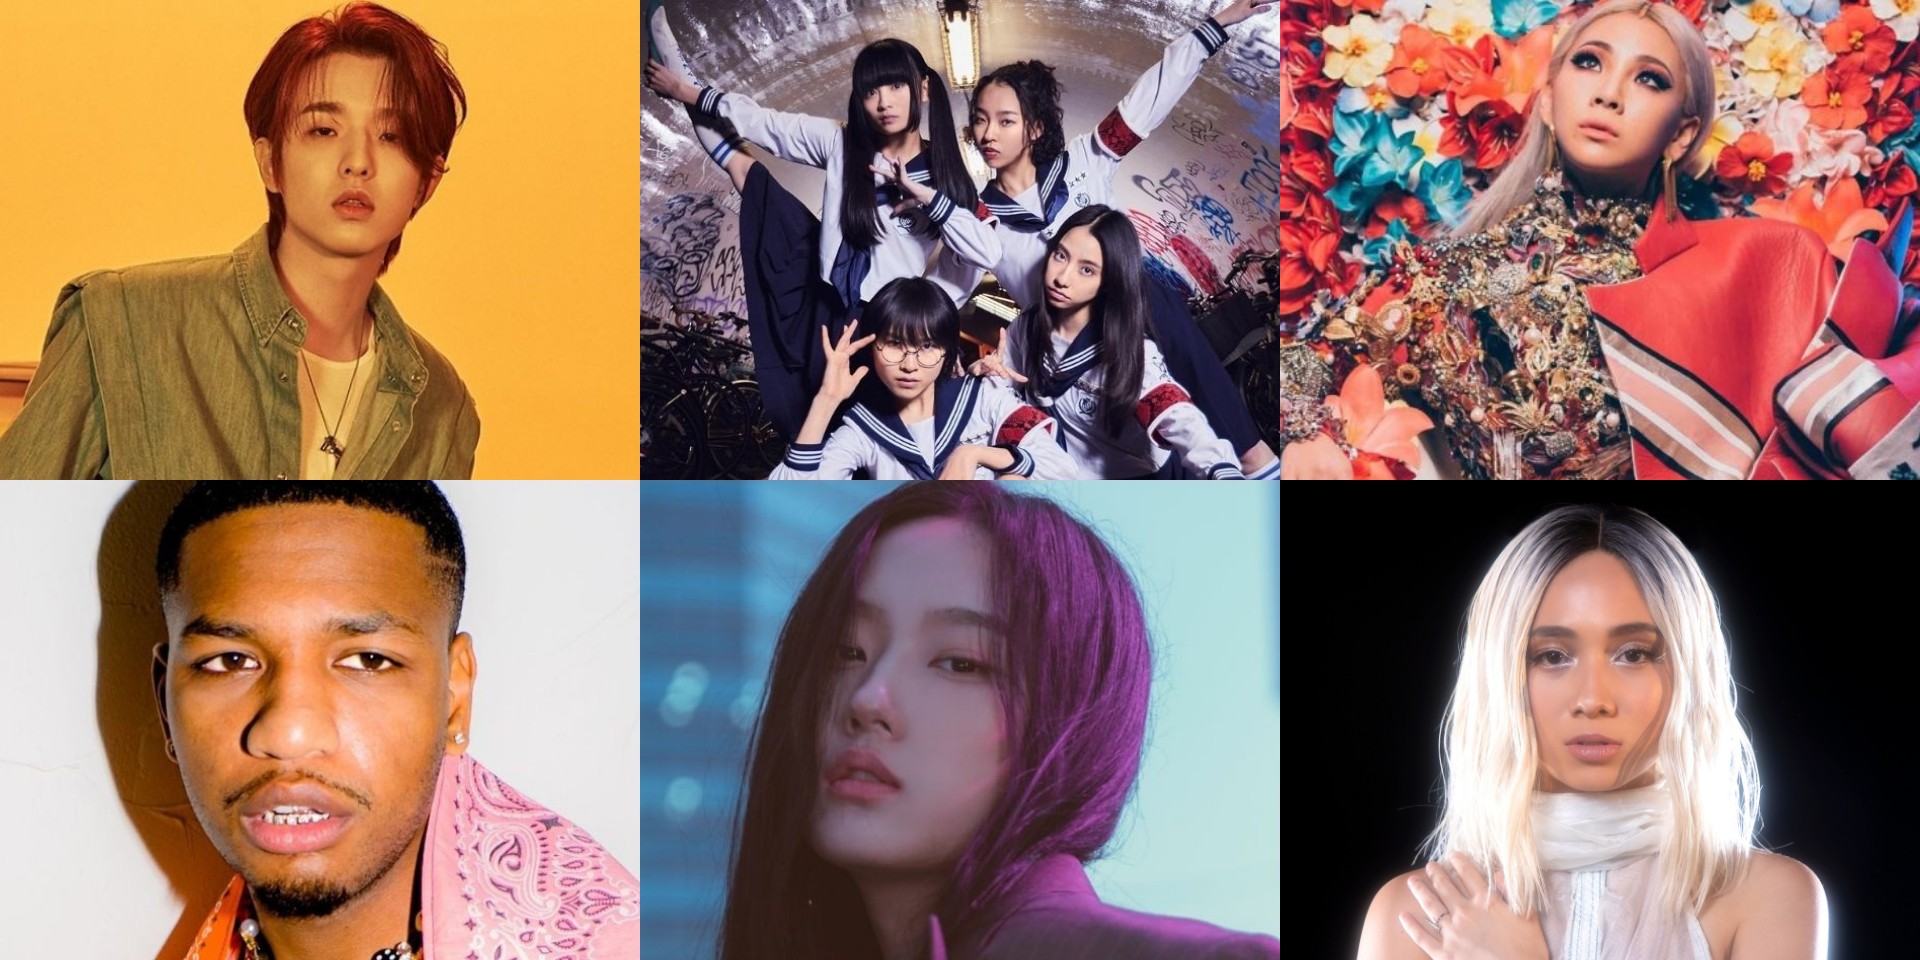 Here's how to watch 88rising's 'Asia Rising Together' concert — featuring Day6’s Jae, Seori, NIKI, CL, Guapdad 4000, Atarashii Gakko, and more
